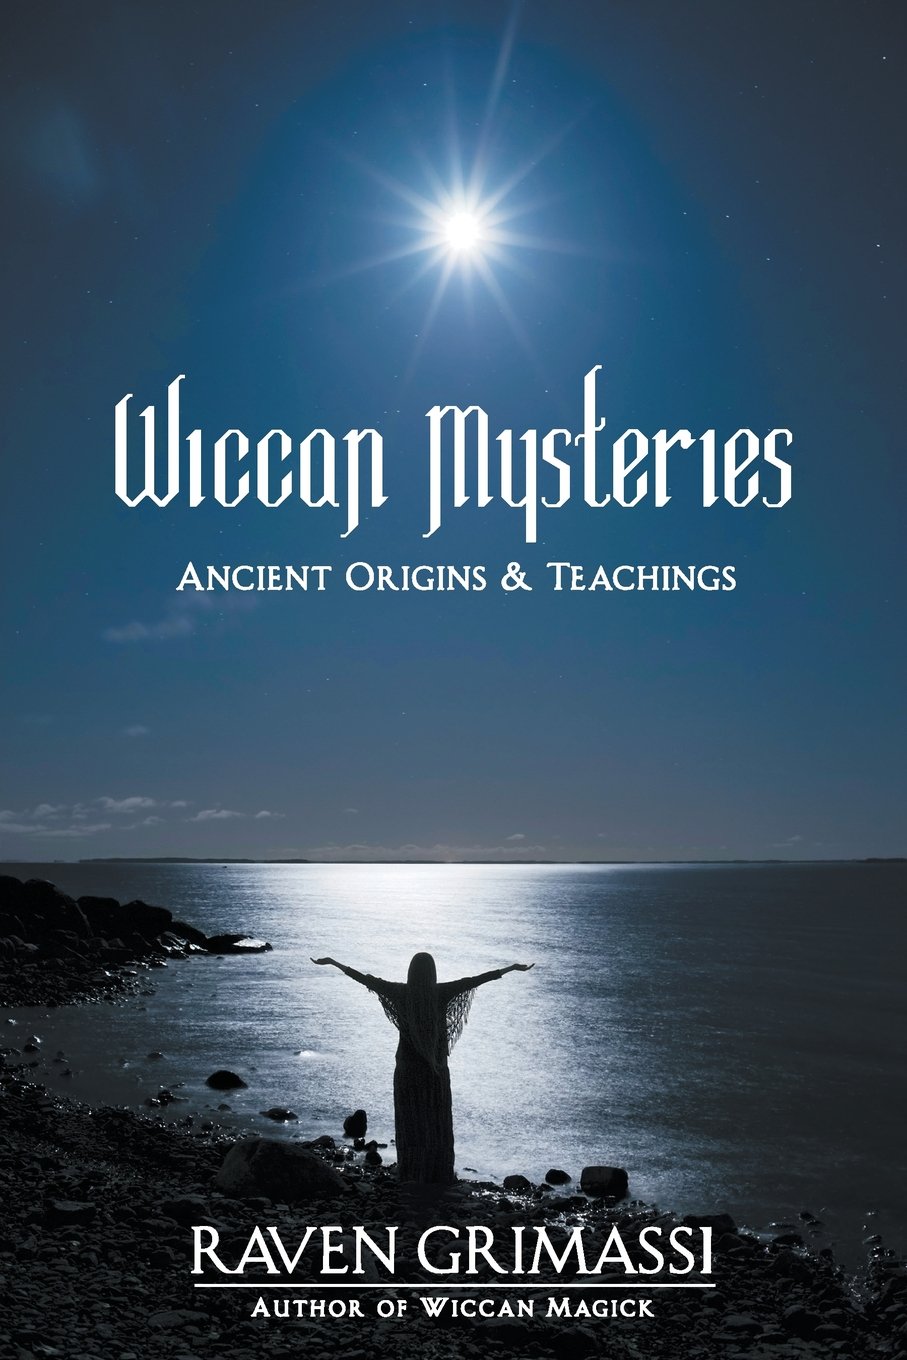 Wiccan Mysteries – Ancient Origins and Teachings